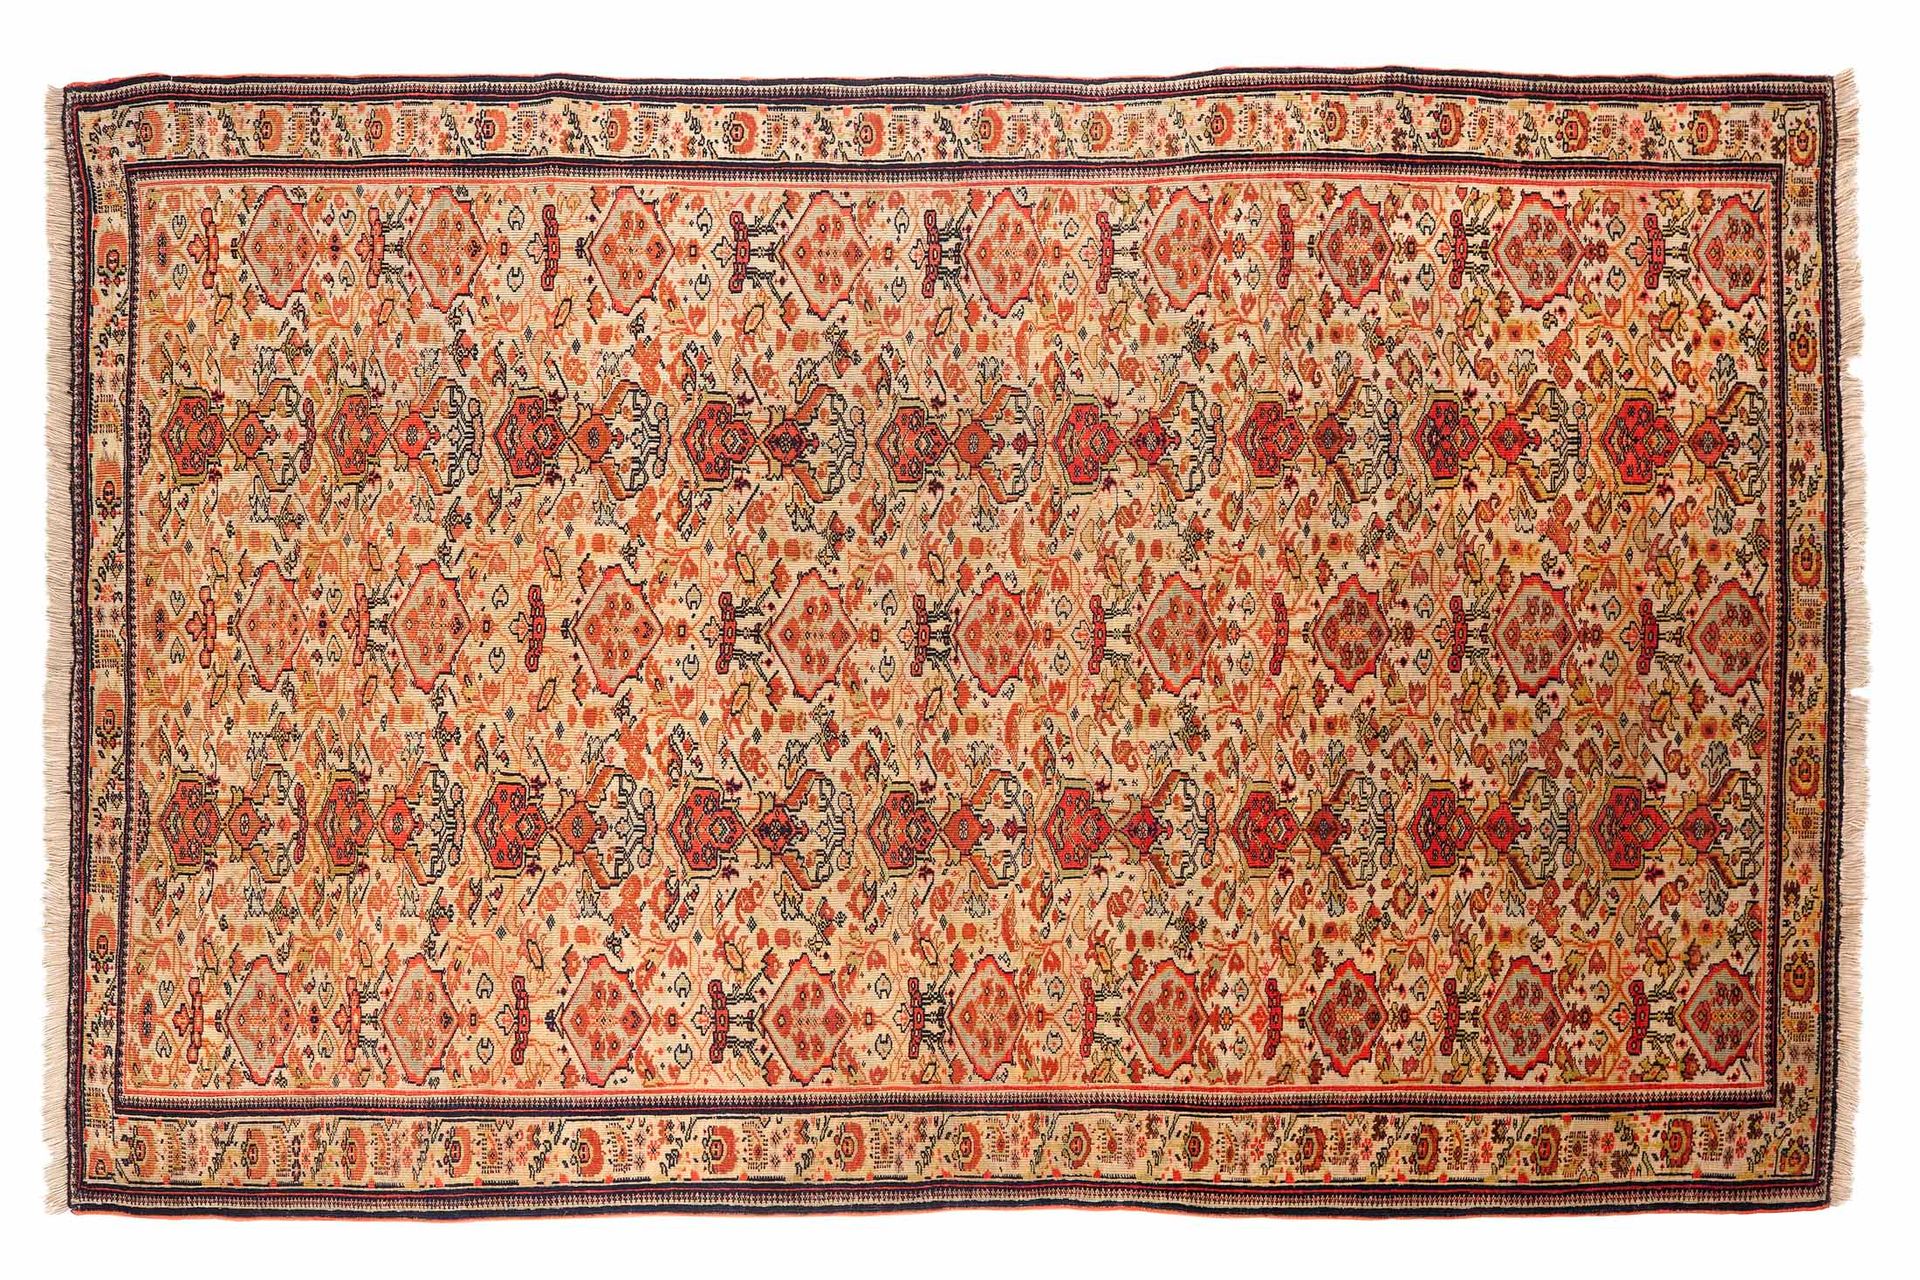 Null Carpet MELAYER Zili-Sultan (Persia) end of the 19th century

Dimensions : 1&hellip;